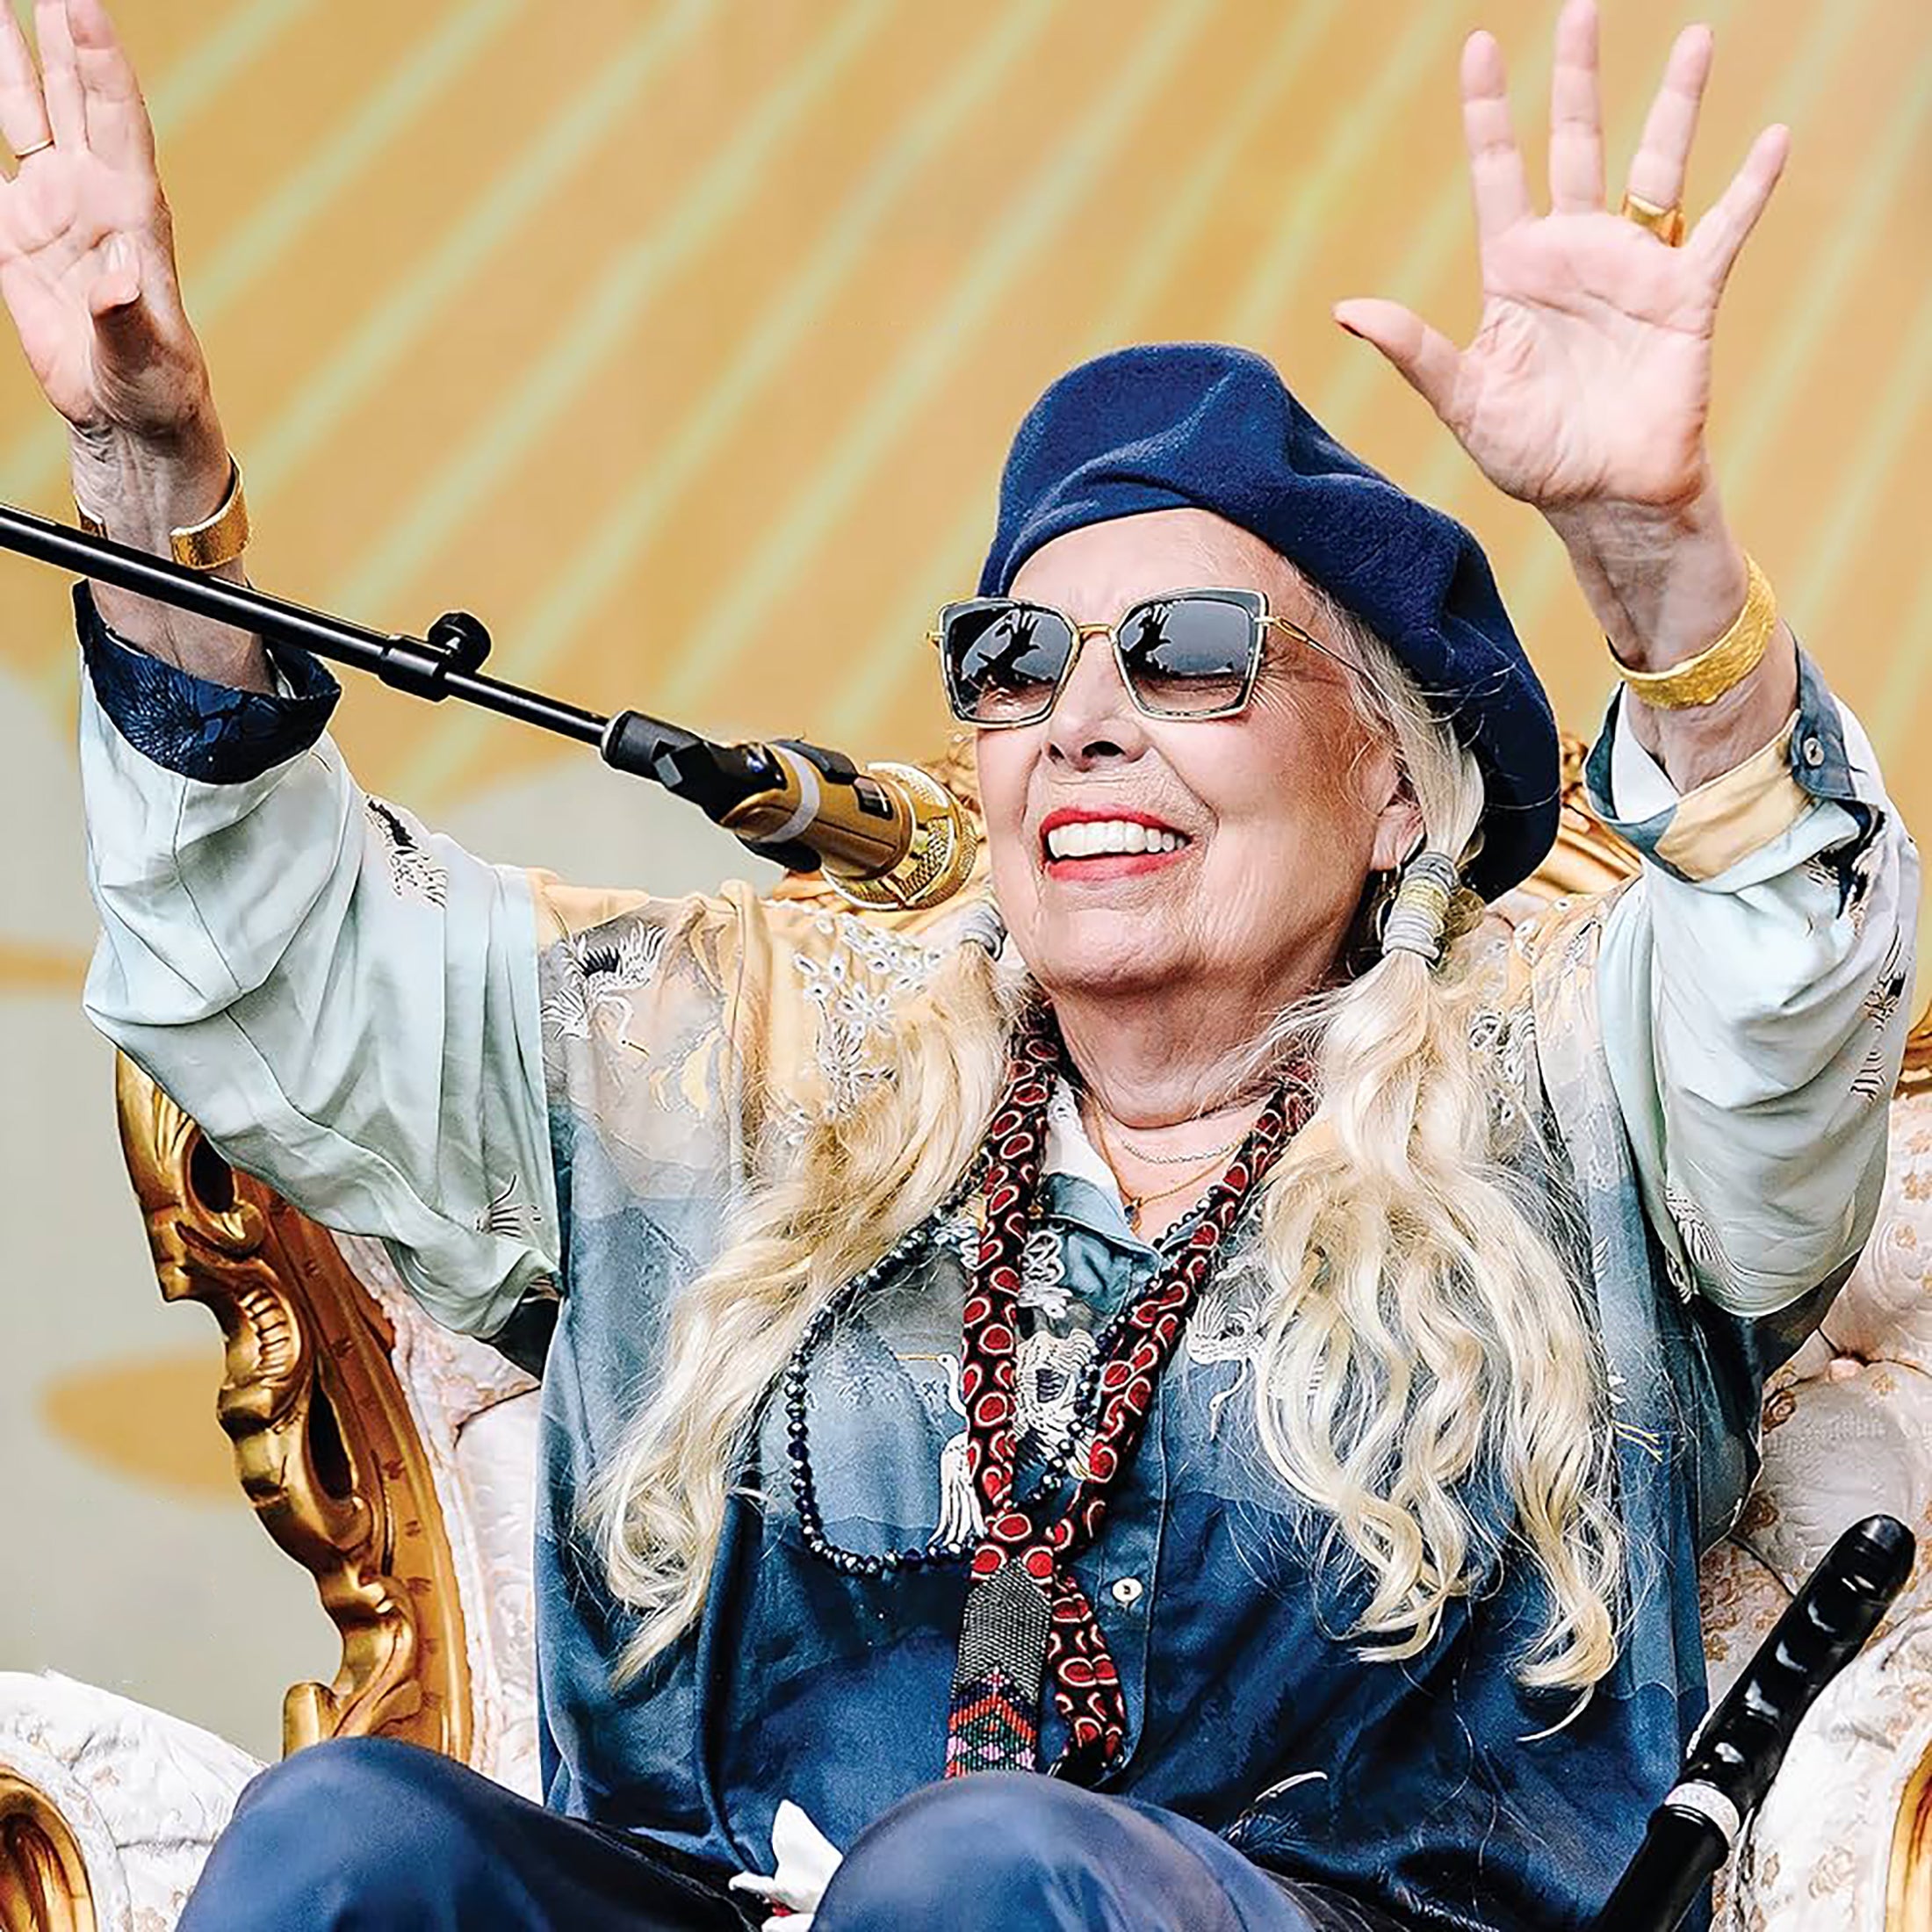 Joni Mitchell & The Joni Jam free pre-sale c0de for early tickets in Hollywood